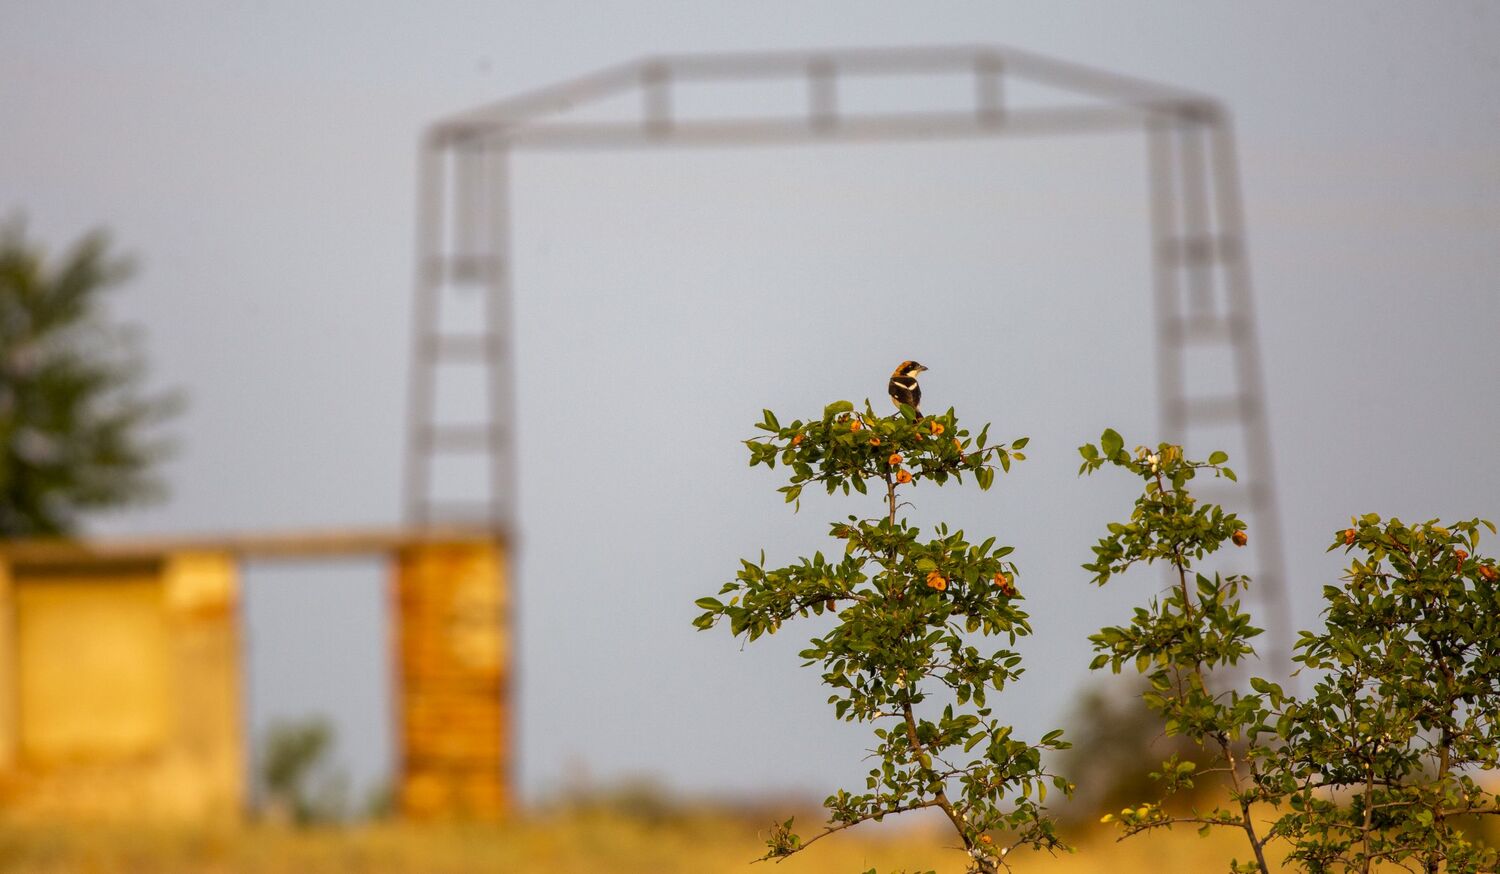 All that is left of the old sheep pen are the remains of walls and a metal frame. Now plants and animals move into the area, like this bird (a shrike) perching on some shrubbery in the foreground.